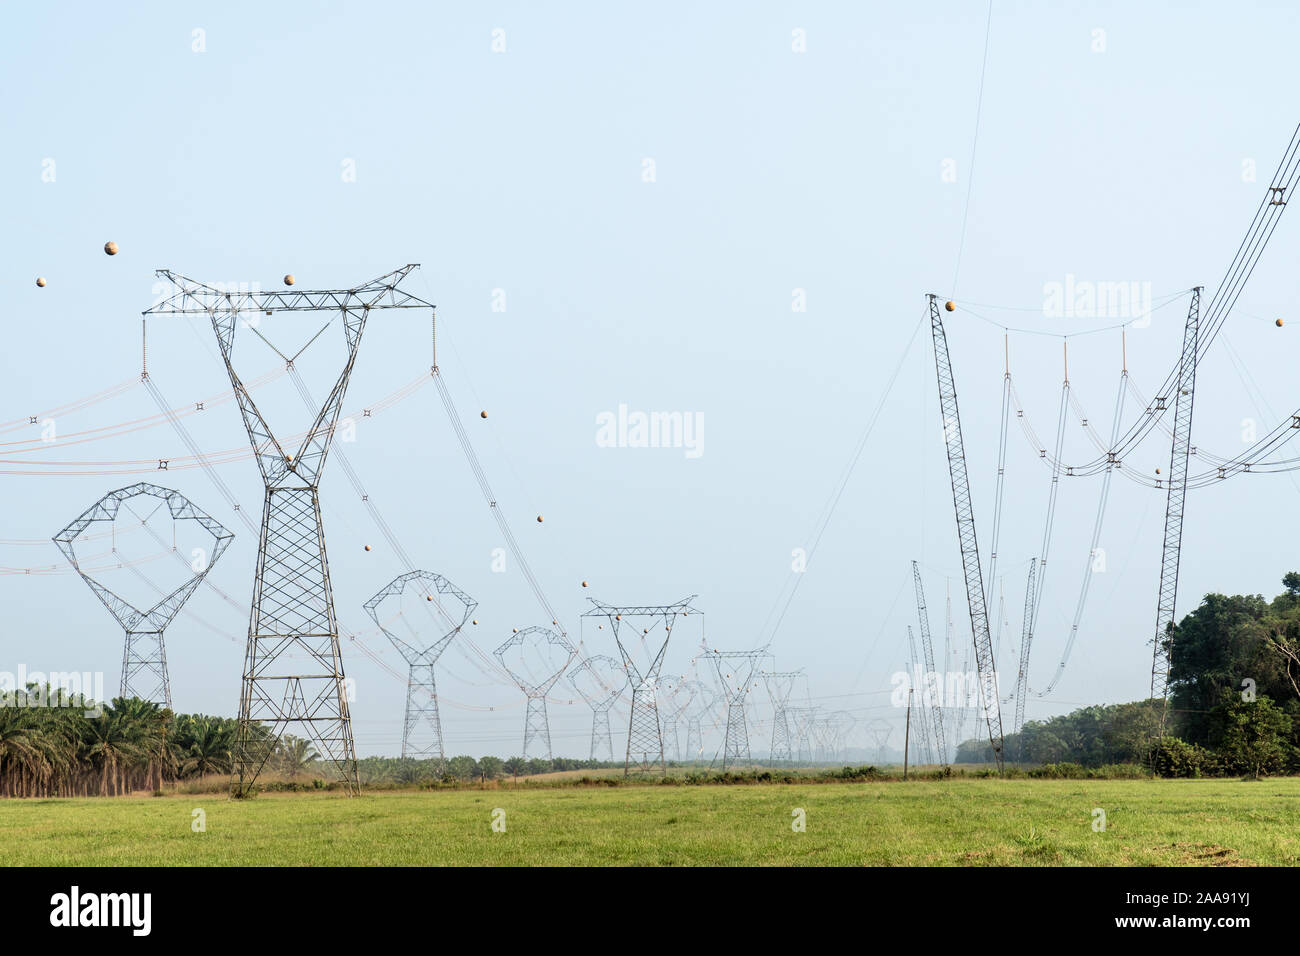 View of high electric voltage transmission tower, power pylon poles and electrical distribution substation on Amazon rainforest, Amazonas, Brazil. Stock Photo